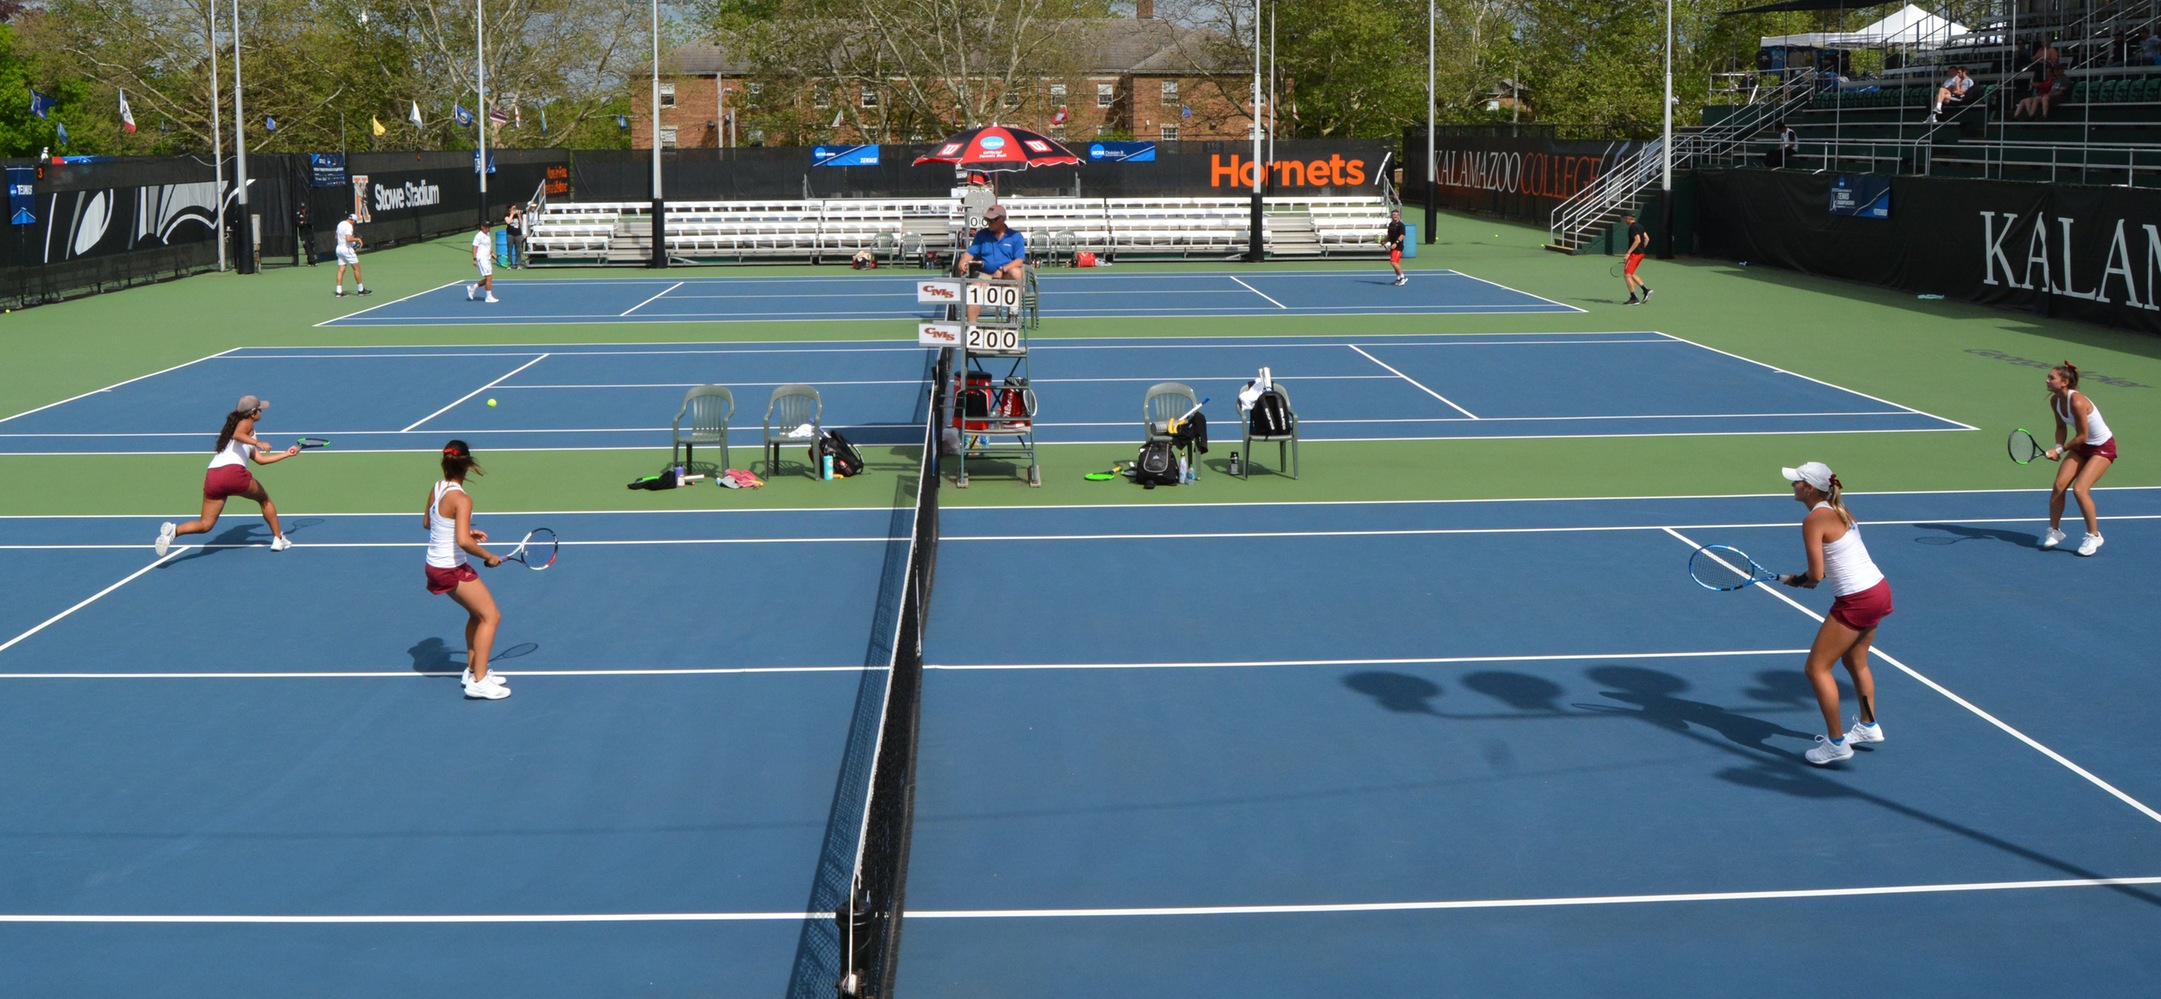 Caroline Cox and Catherine Allen (right) face Nicole Tan and Sarah Bahsoun (left) in the NCAA Doubles Championship